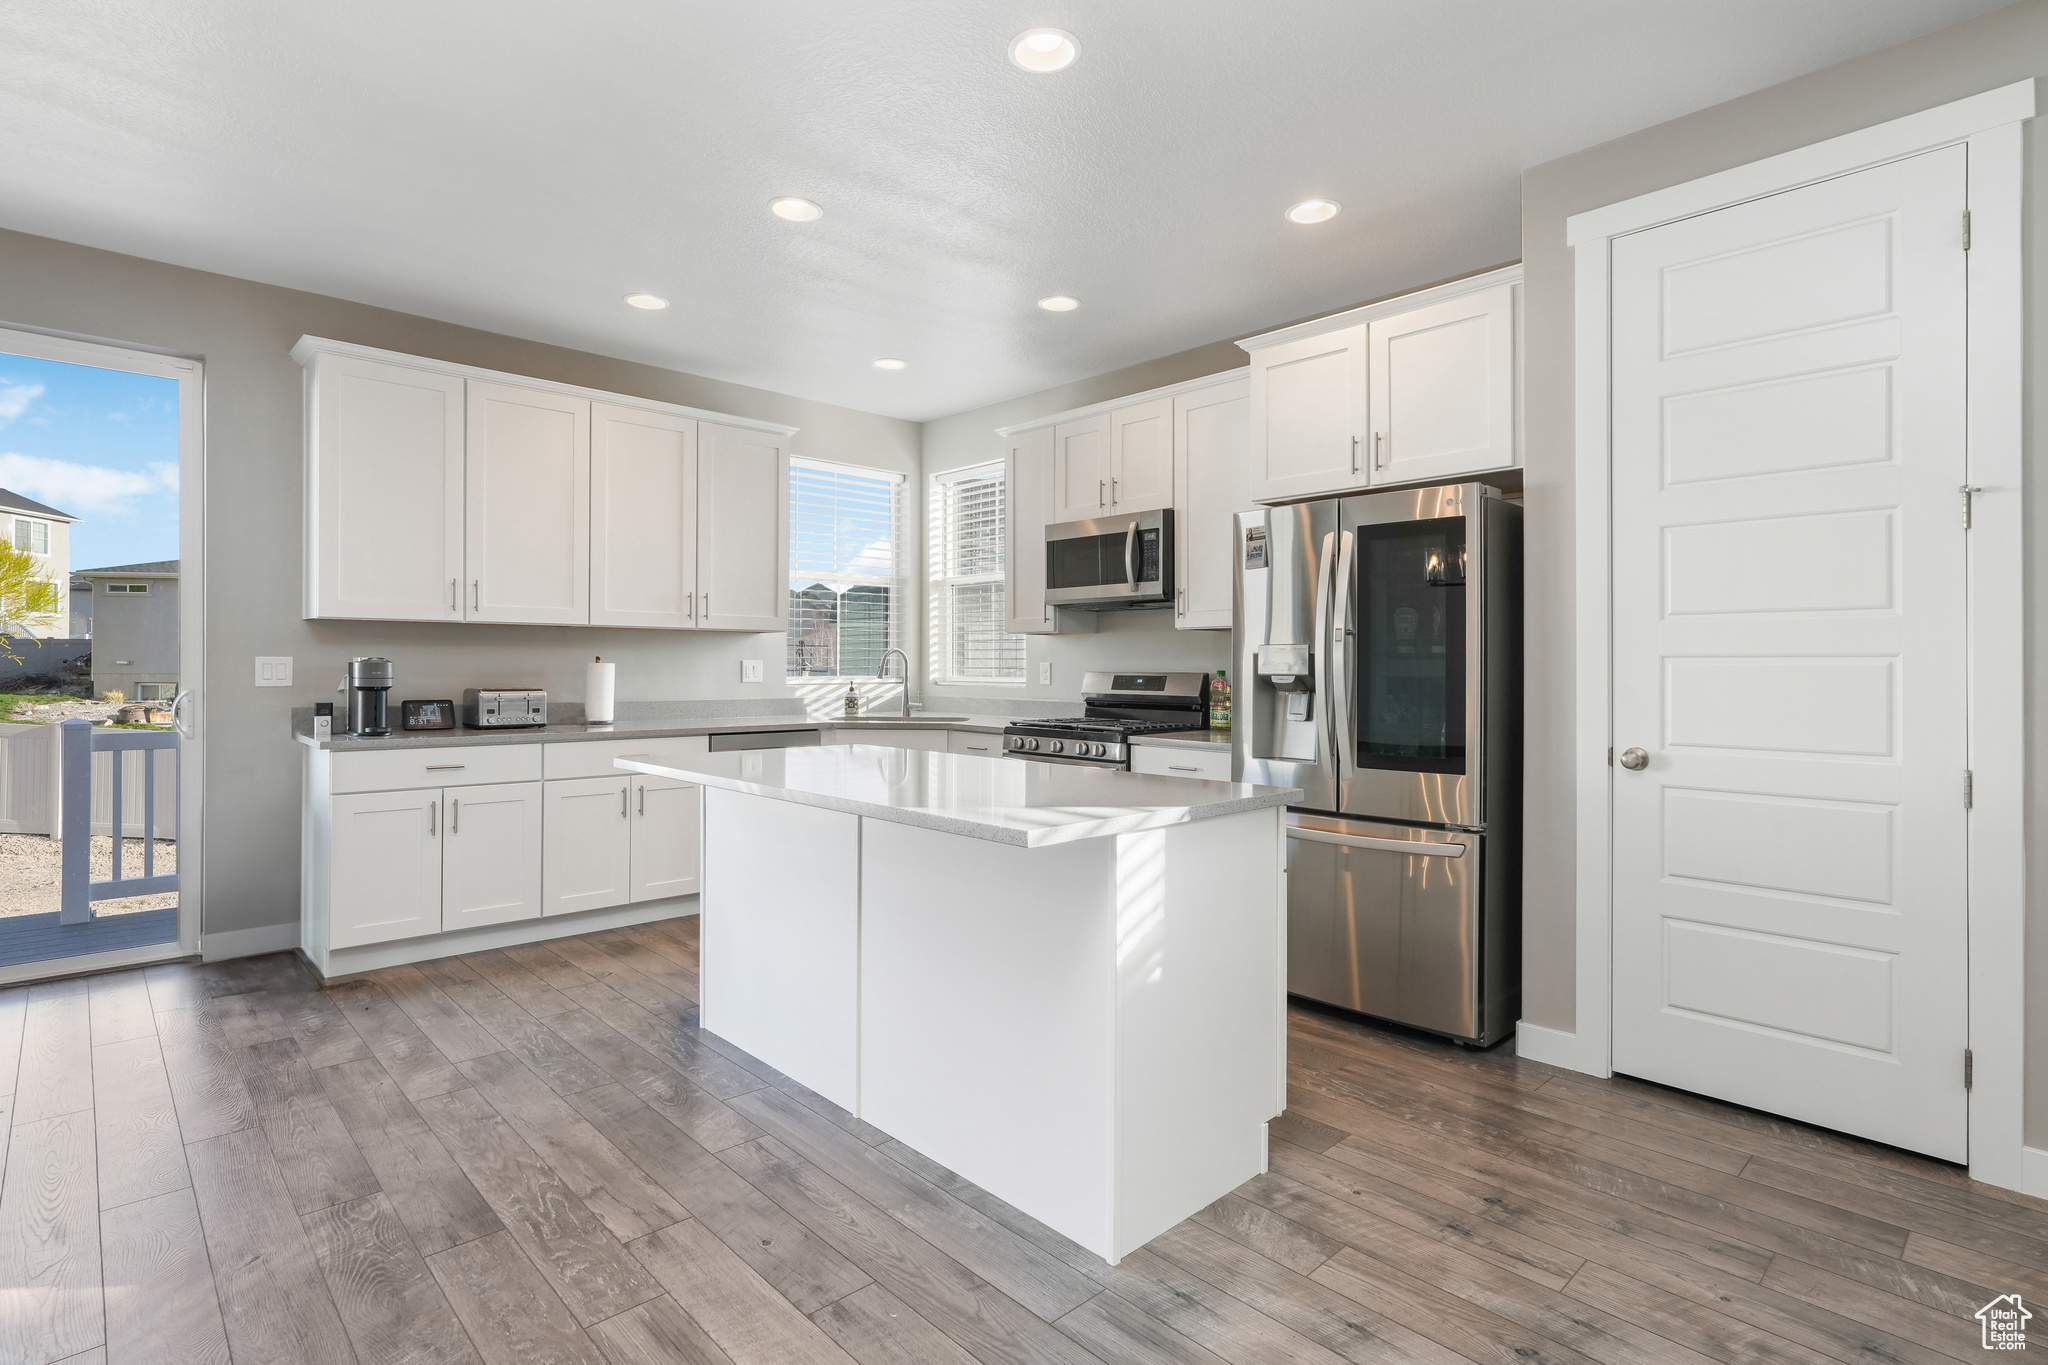 Kitchen featuring a kitchen island, white cabinets, sink, stainless steel appliances, and hardwood / wood-style flooring